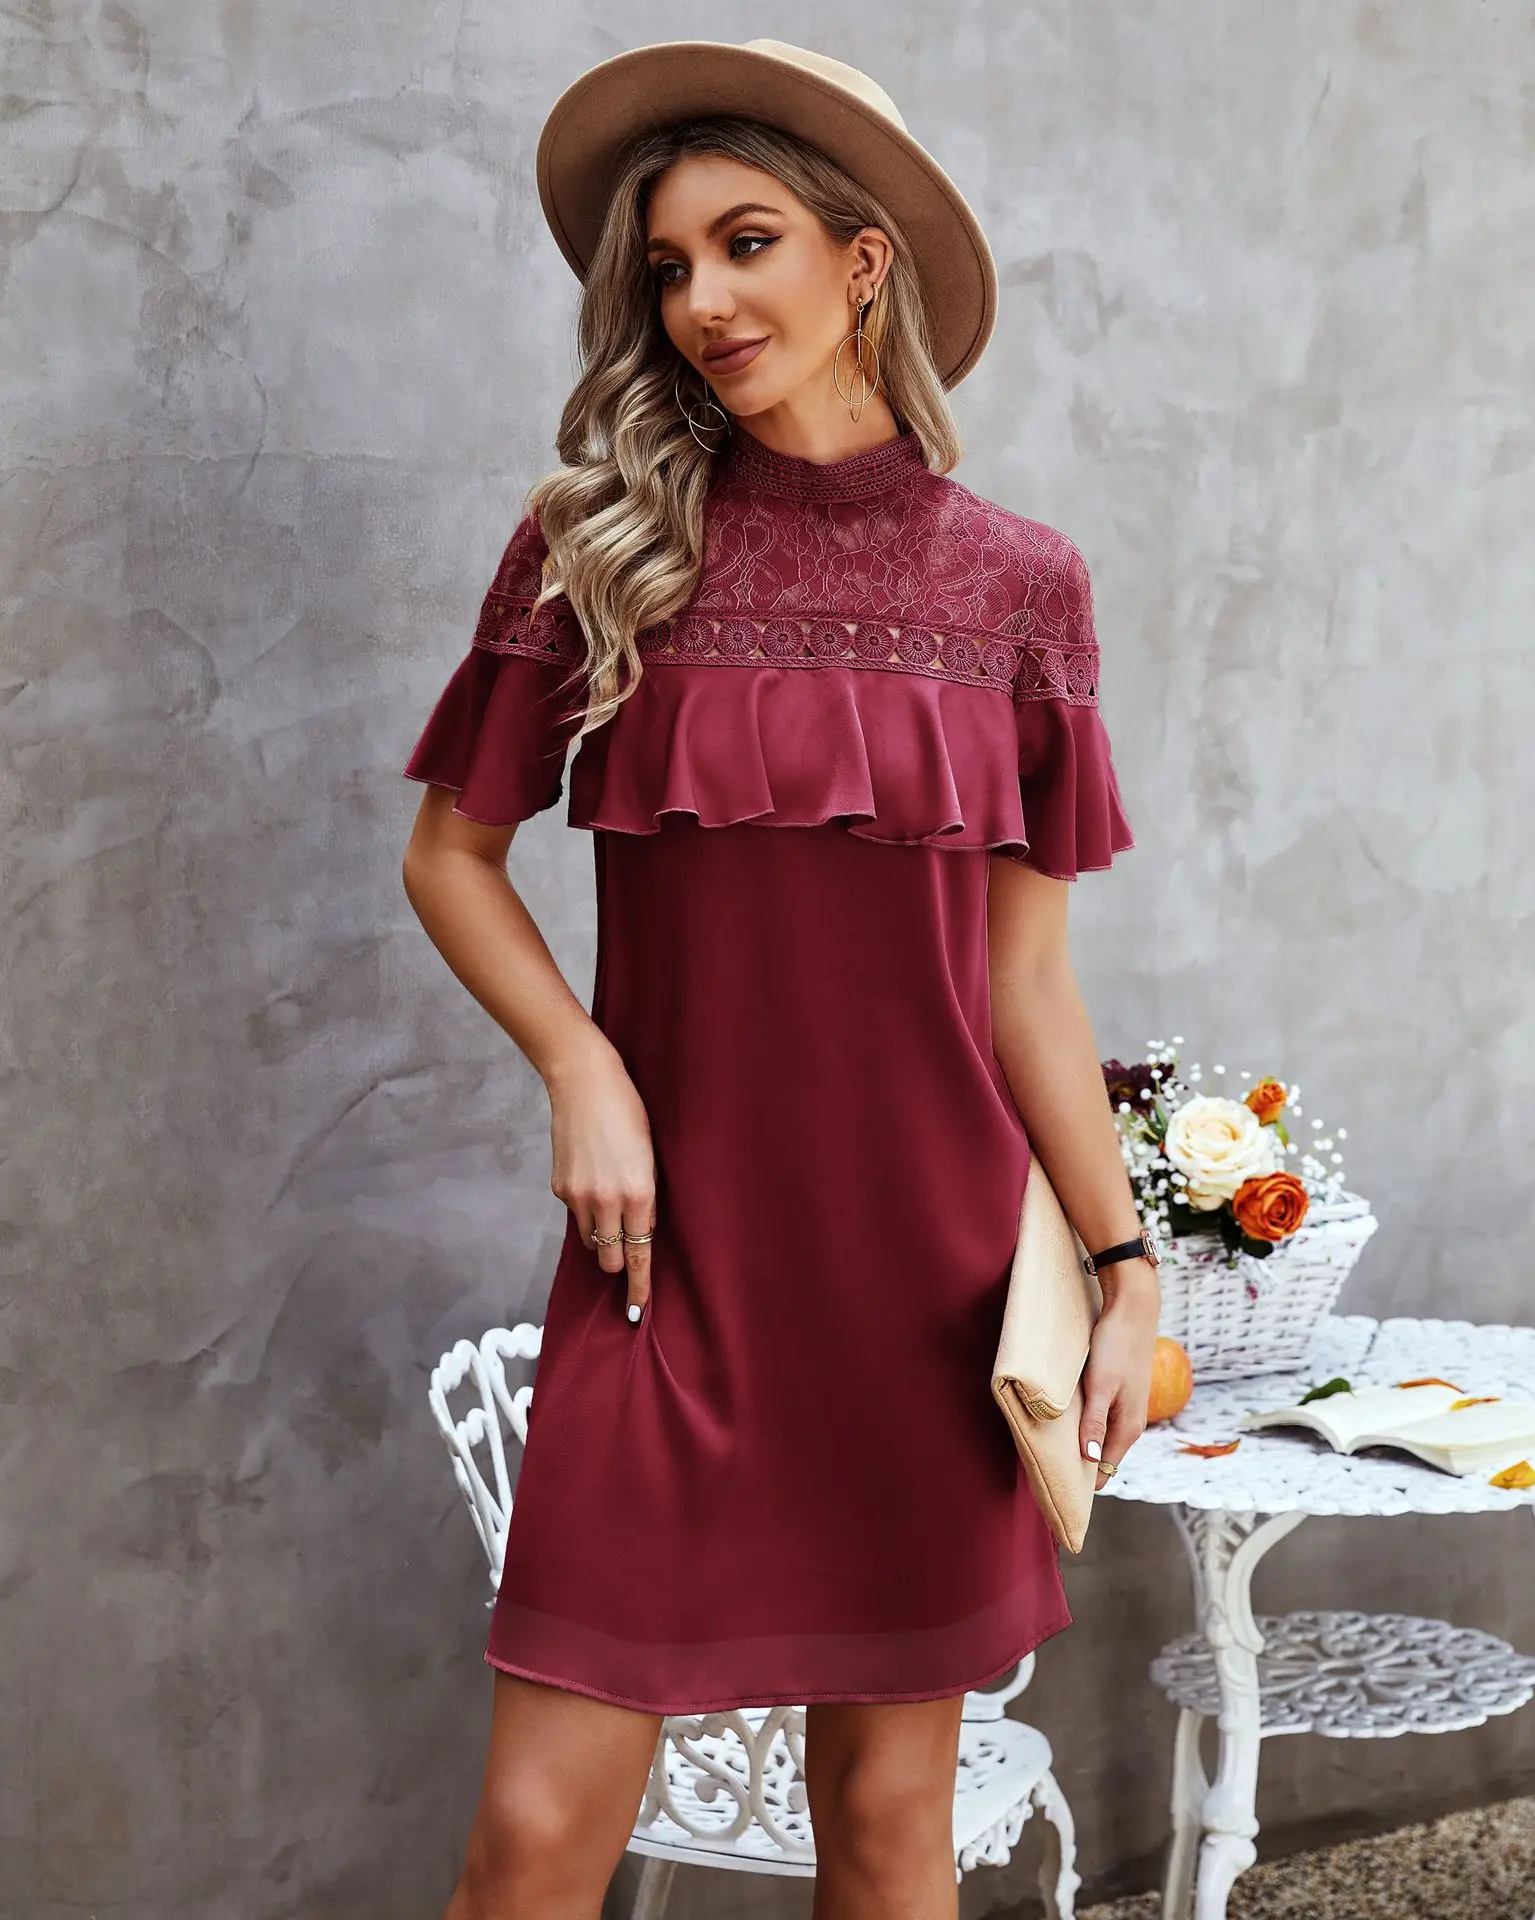 

Summer Fashion Lace Stitching Solid Color Flounces Short Sleeve Dress For Lady Sundress Mini Wear